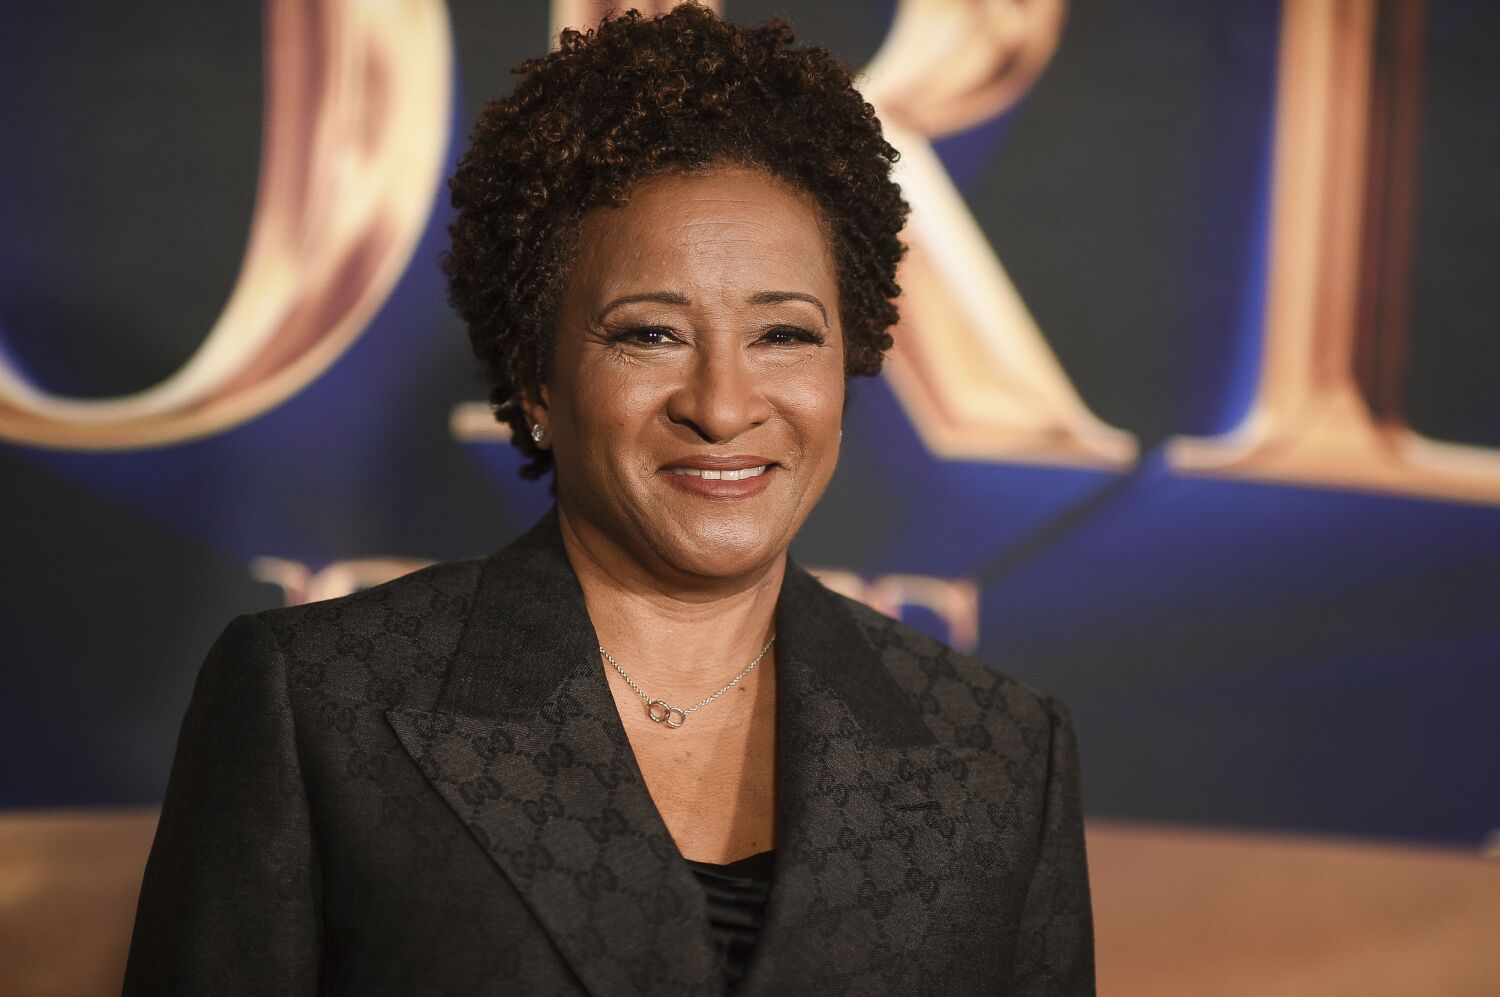 Wanda Sykes criticizes Dave Chappelle's anti-trans jokes: 'So hurtful and damaging'